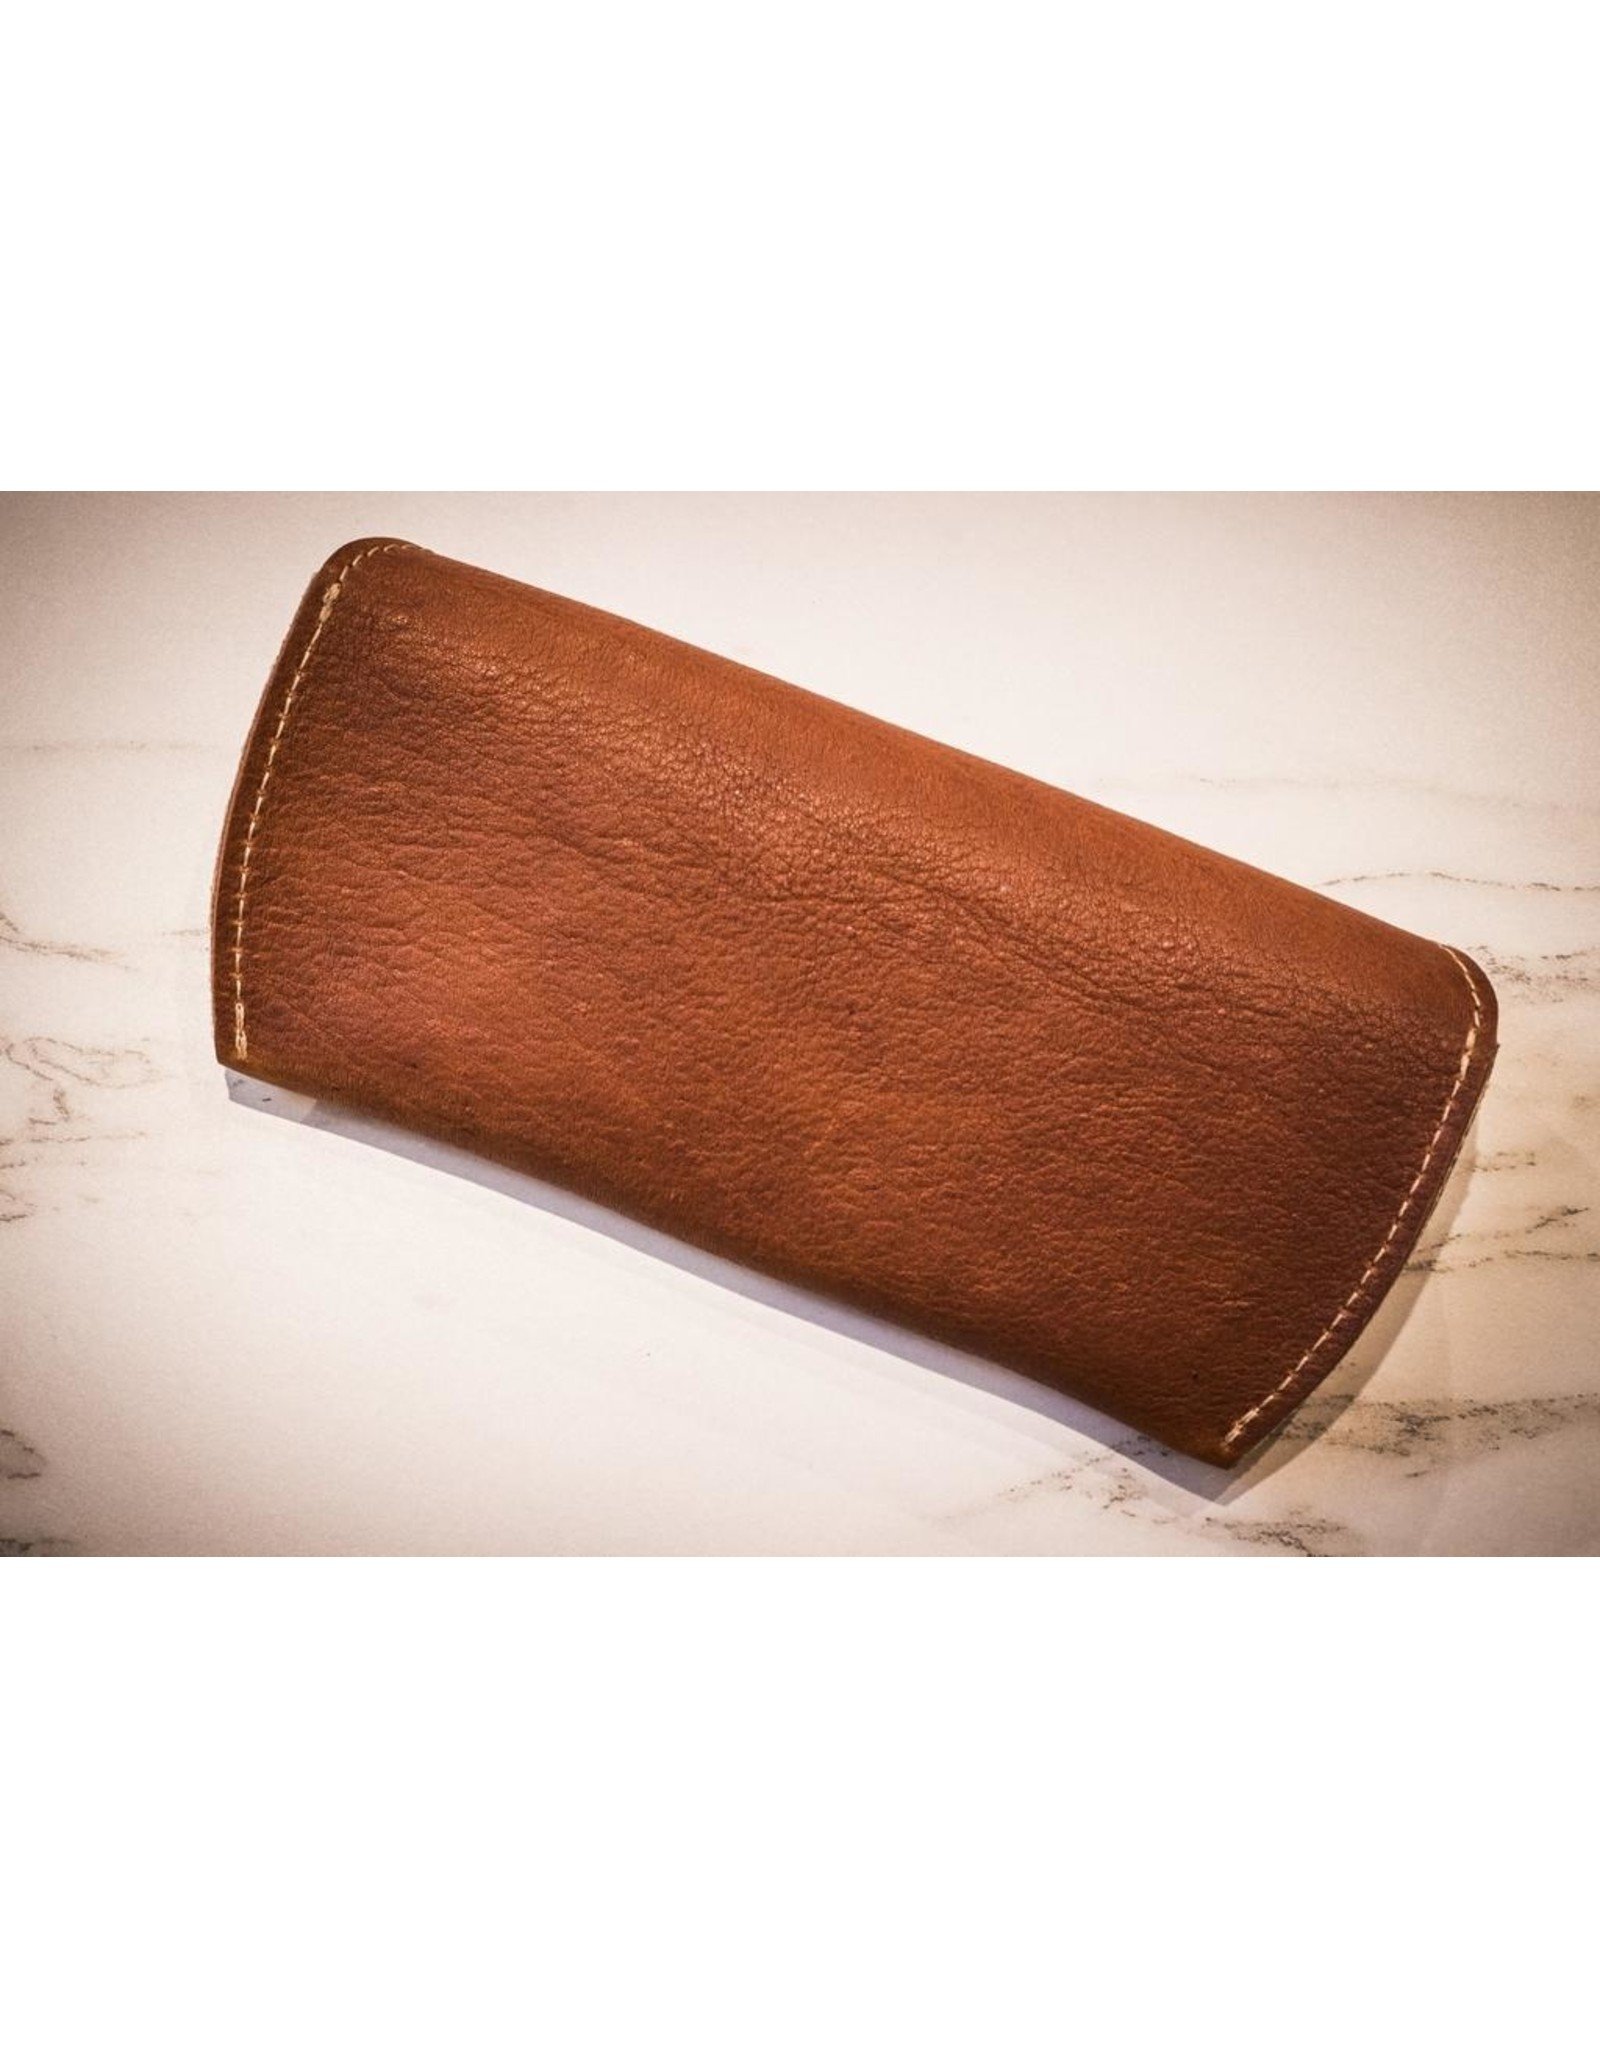 Leather Sunglass Holder In Brown